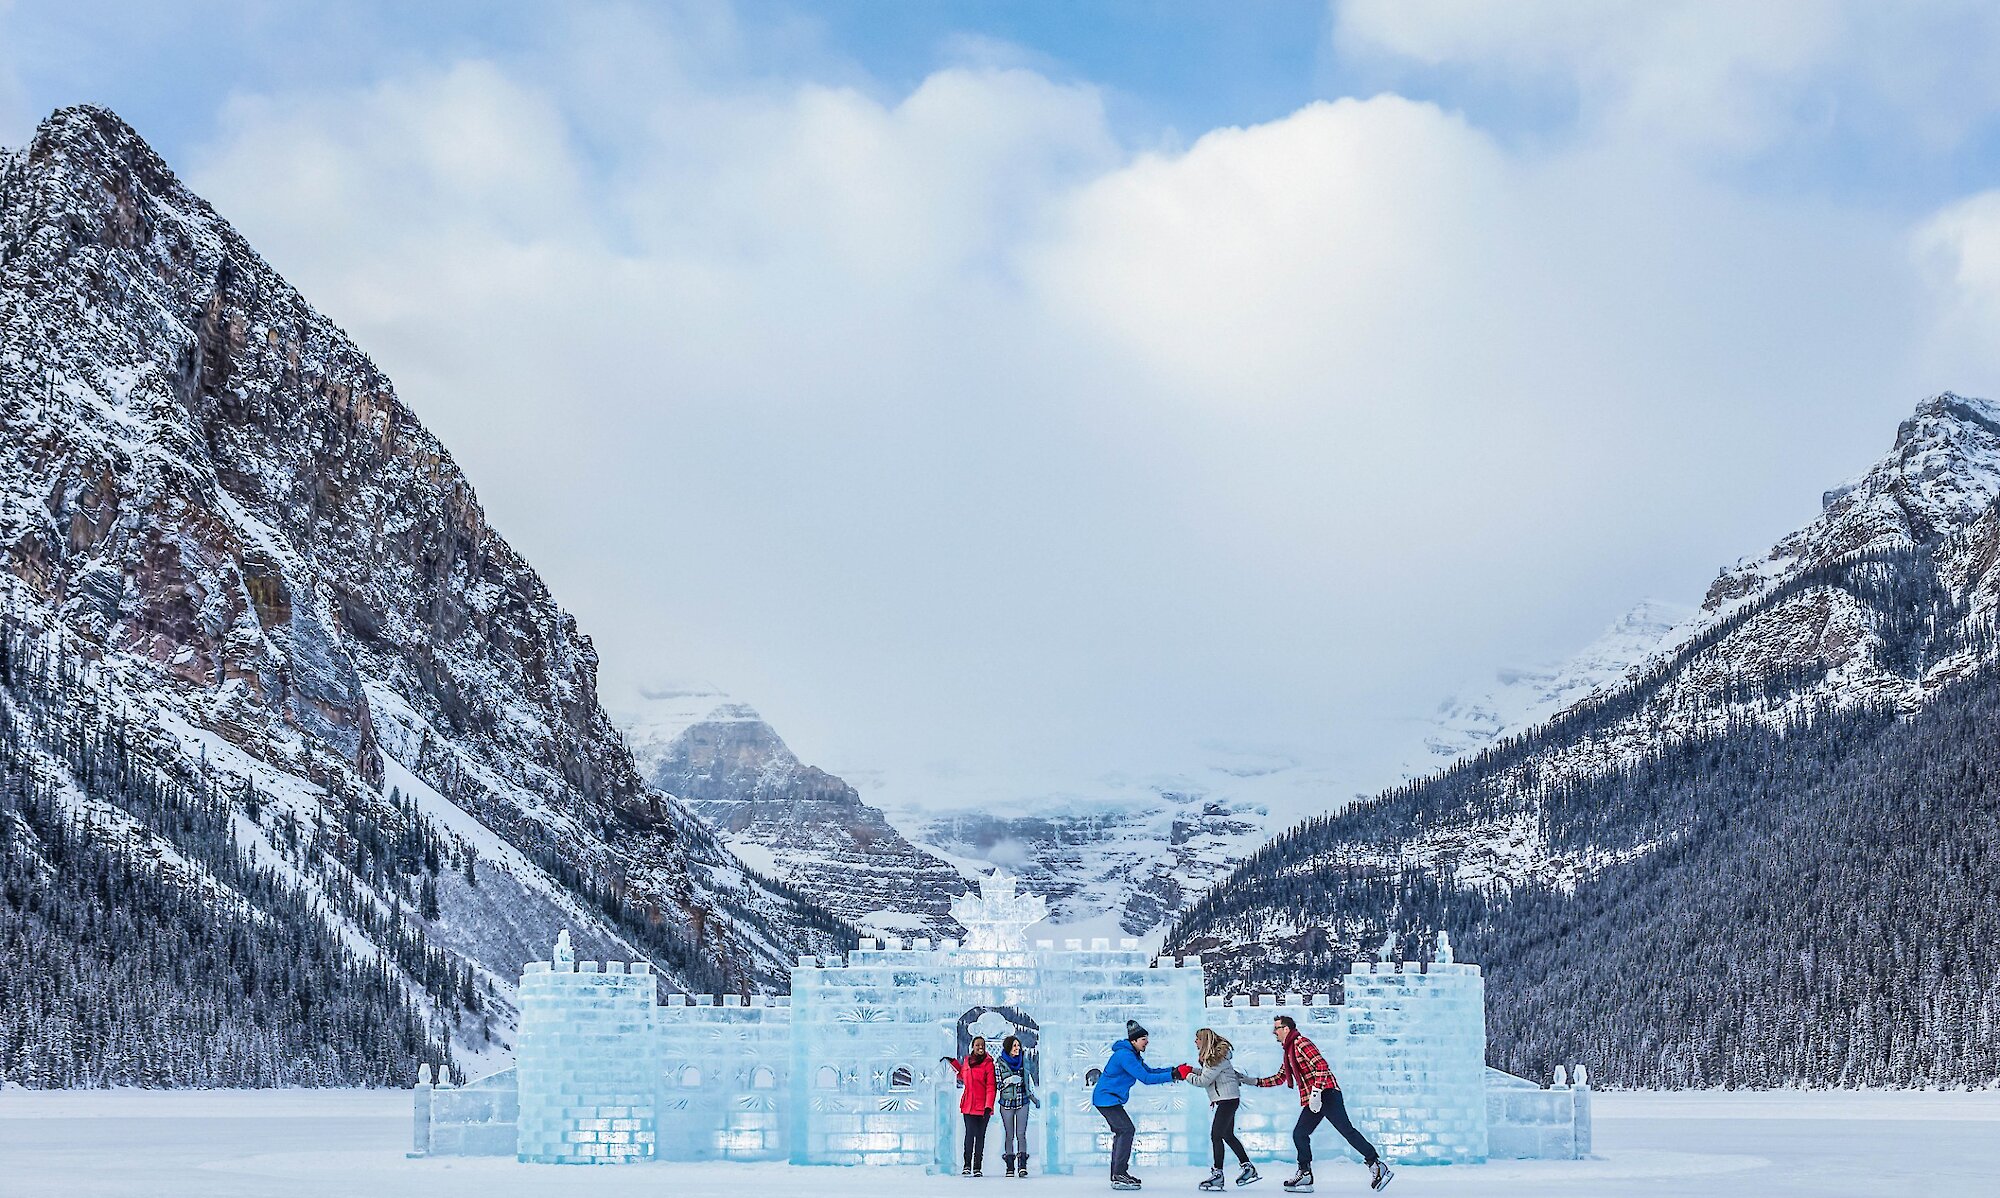 Skaters on Lake Louise in front of the Ice Castle